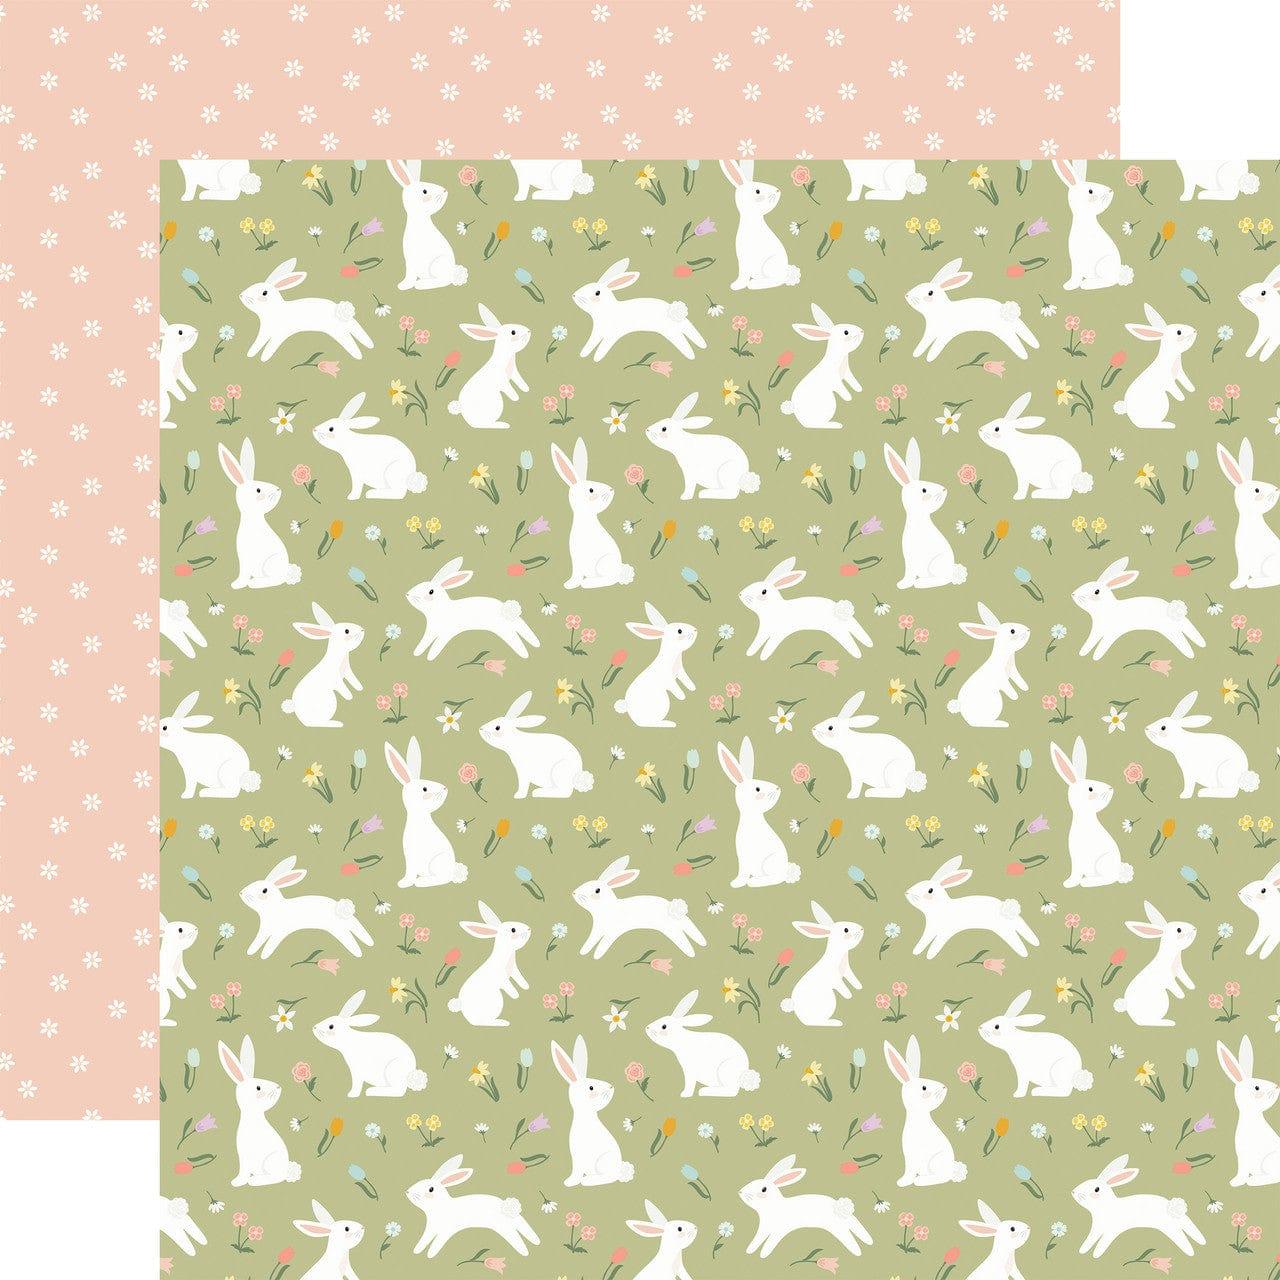 It's Easter Time Collection Blissful Bunnies 12 x 12 Double-Sided Scrapbook Paper by Echo Park Paper - Scrapbook Supply Companies